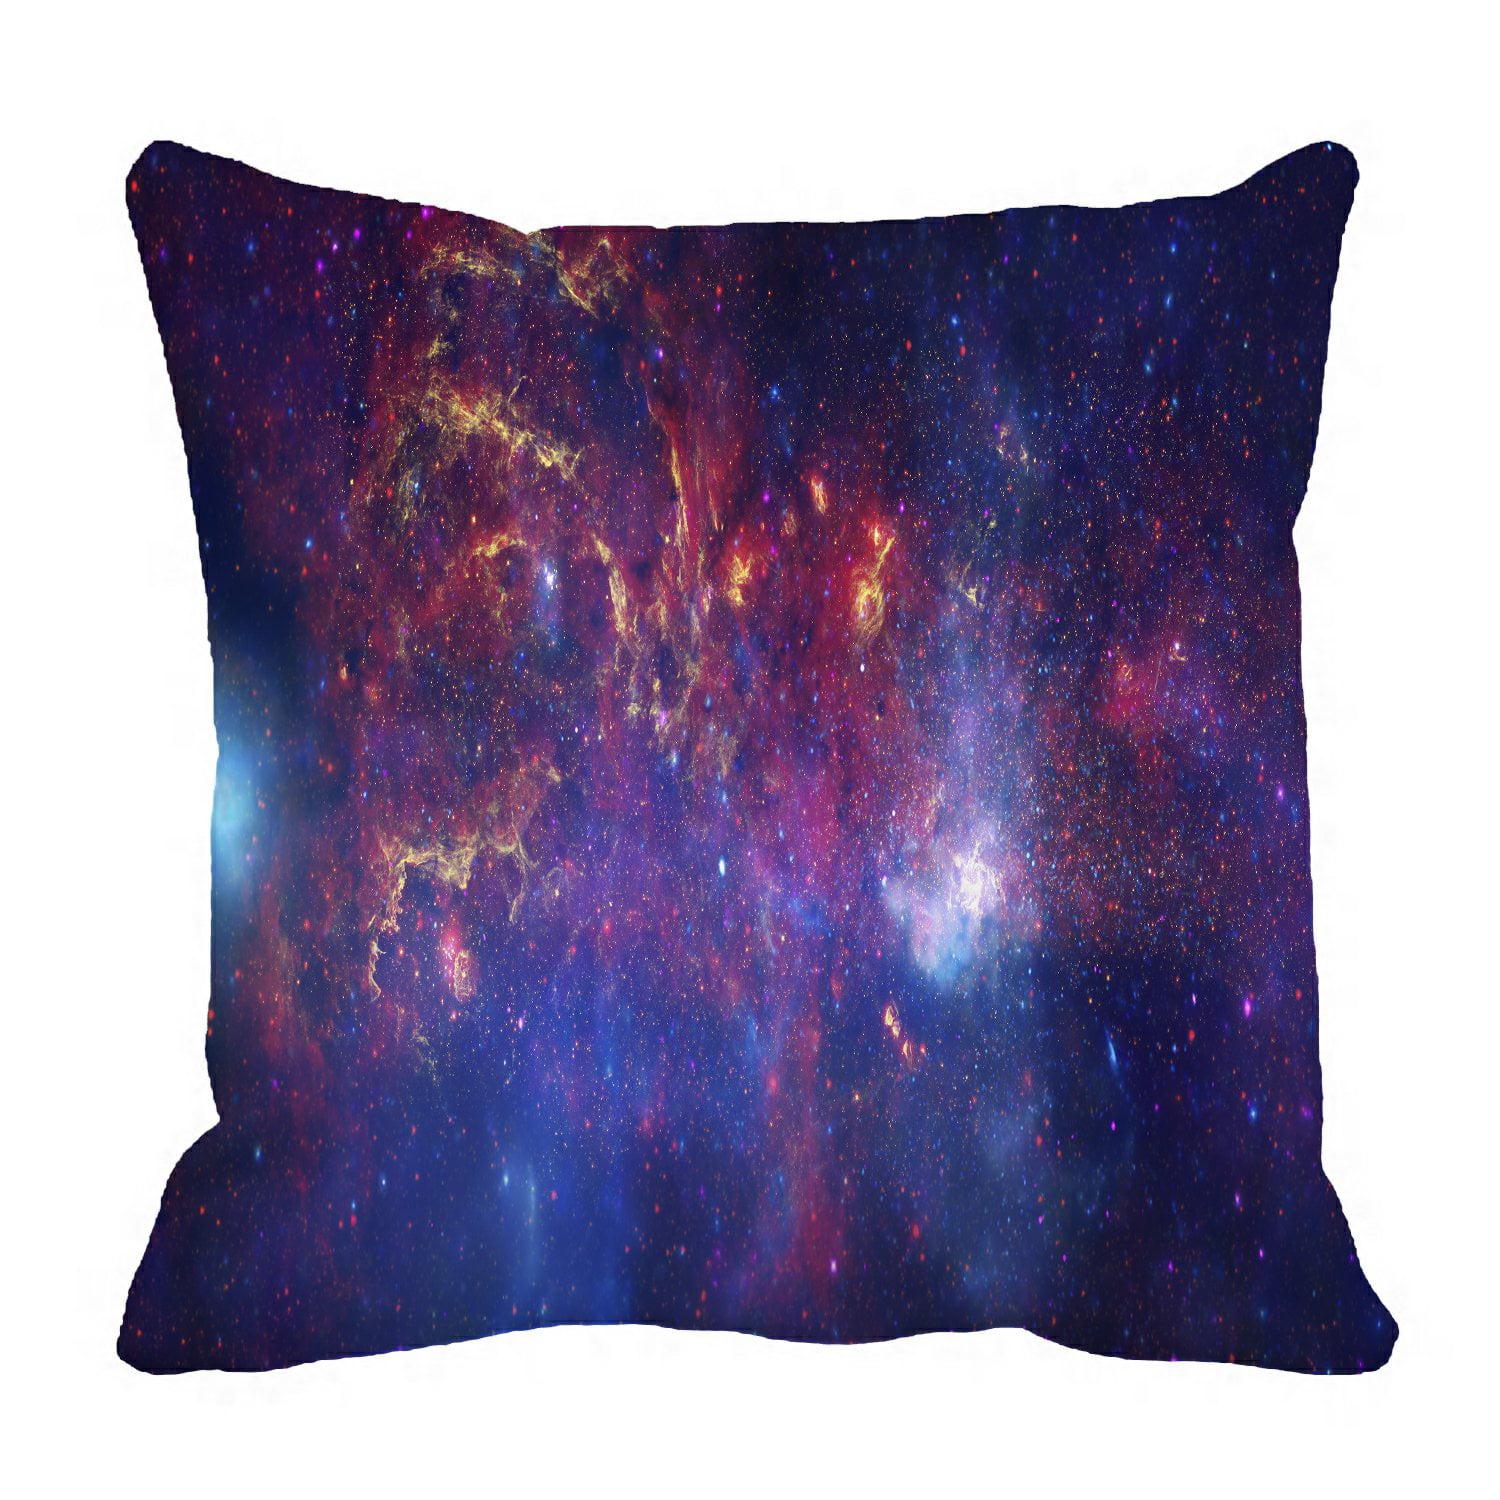 Pink Space Stars Galaxy Nebula Throw Pillow Cover w Optional Insert by Roostery 